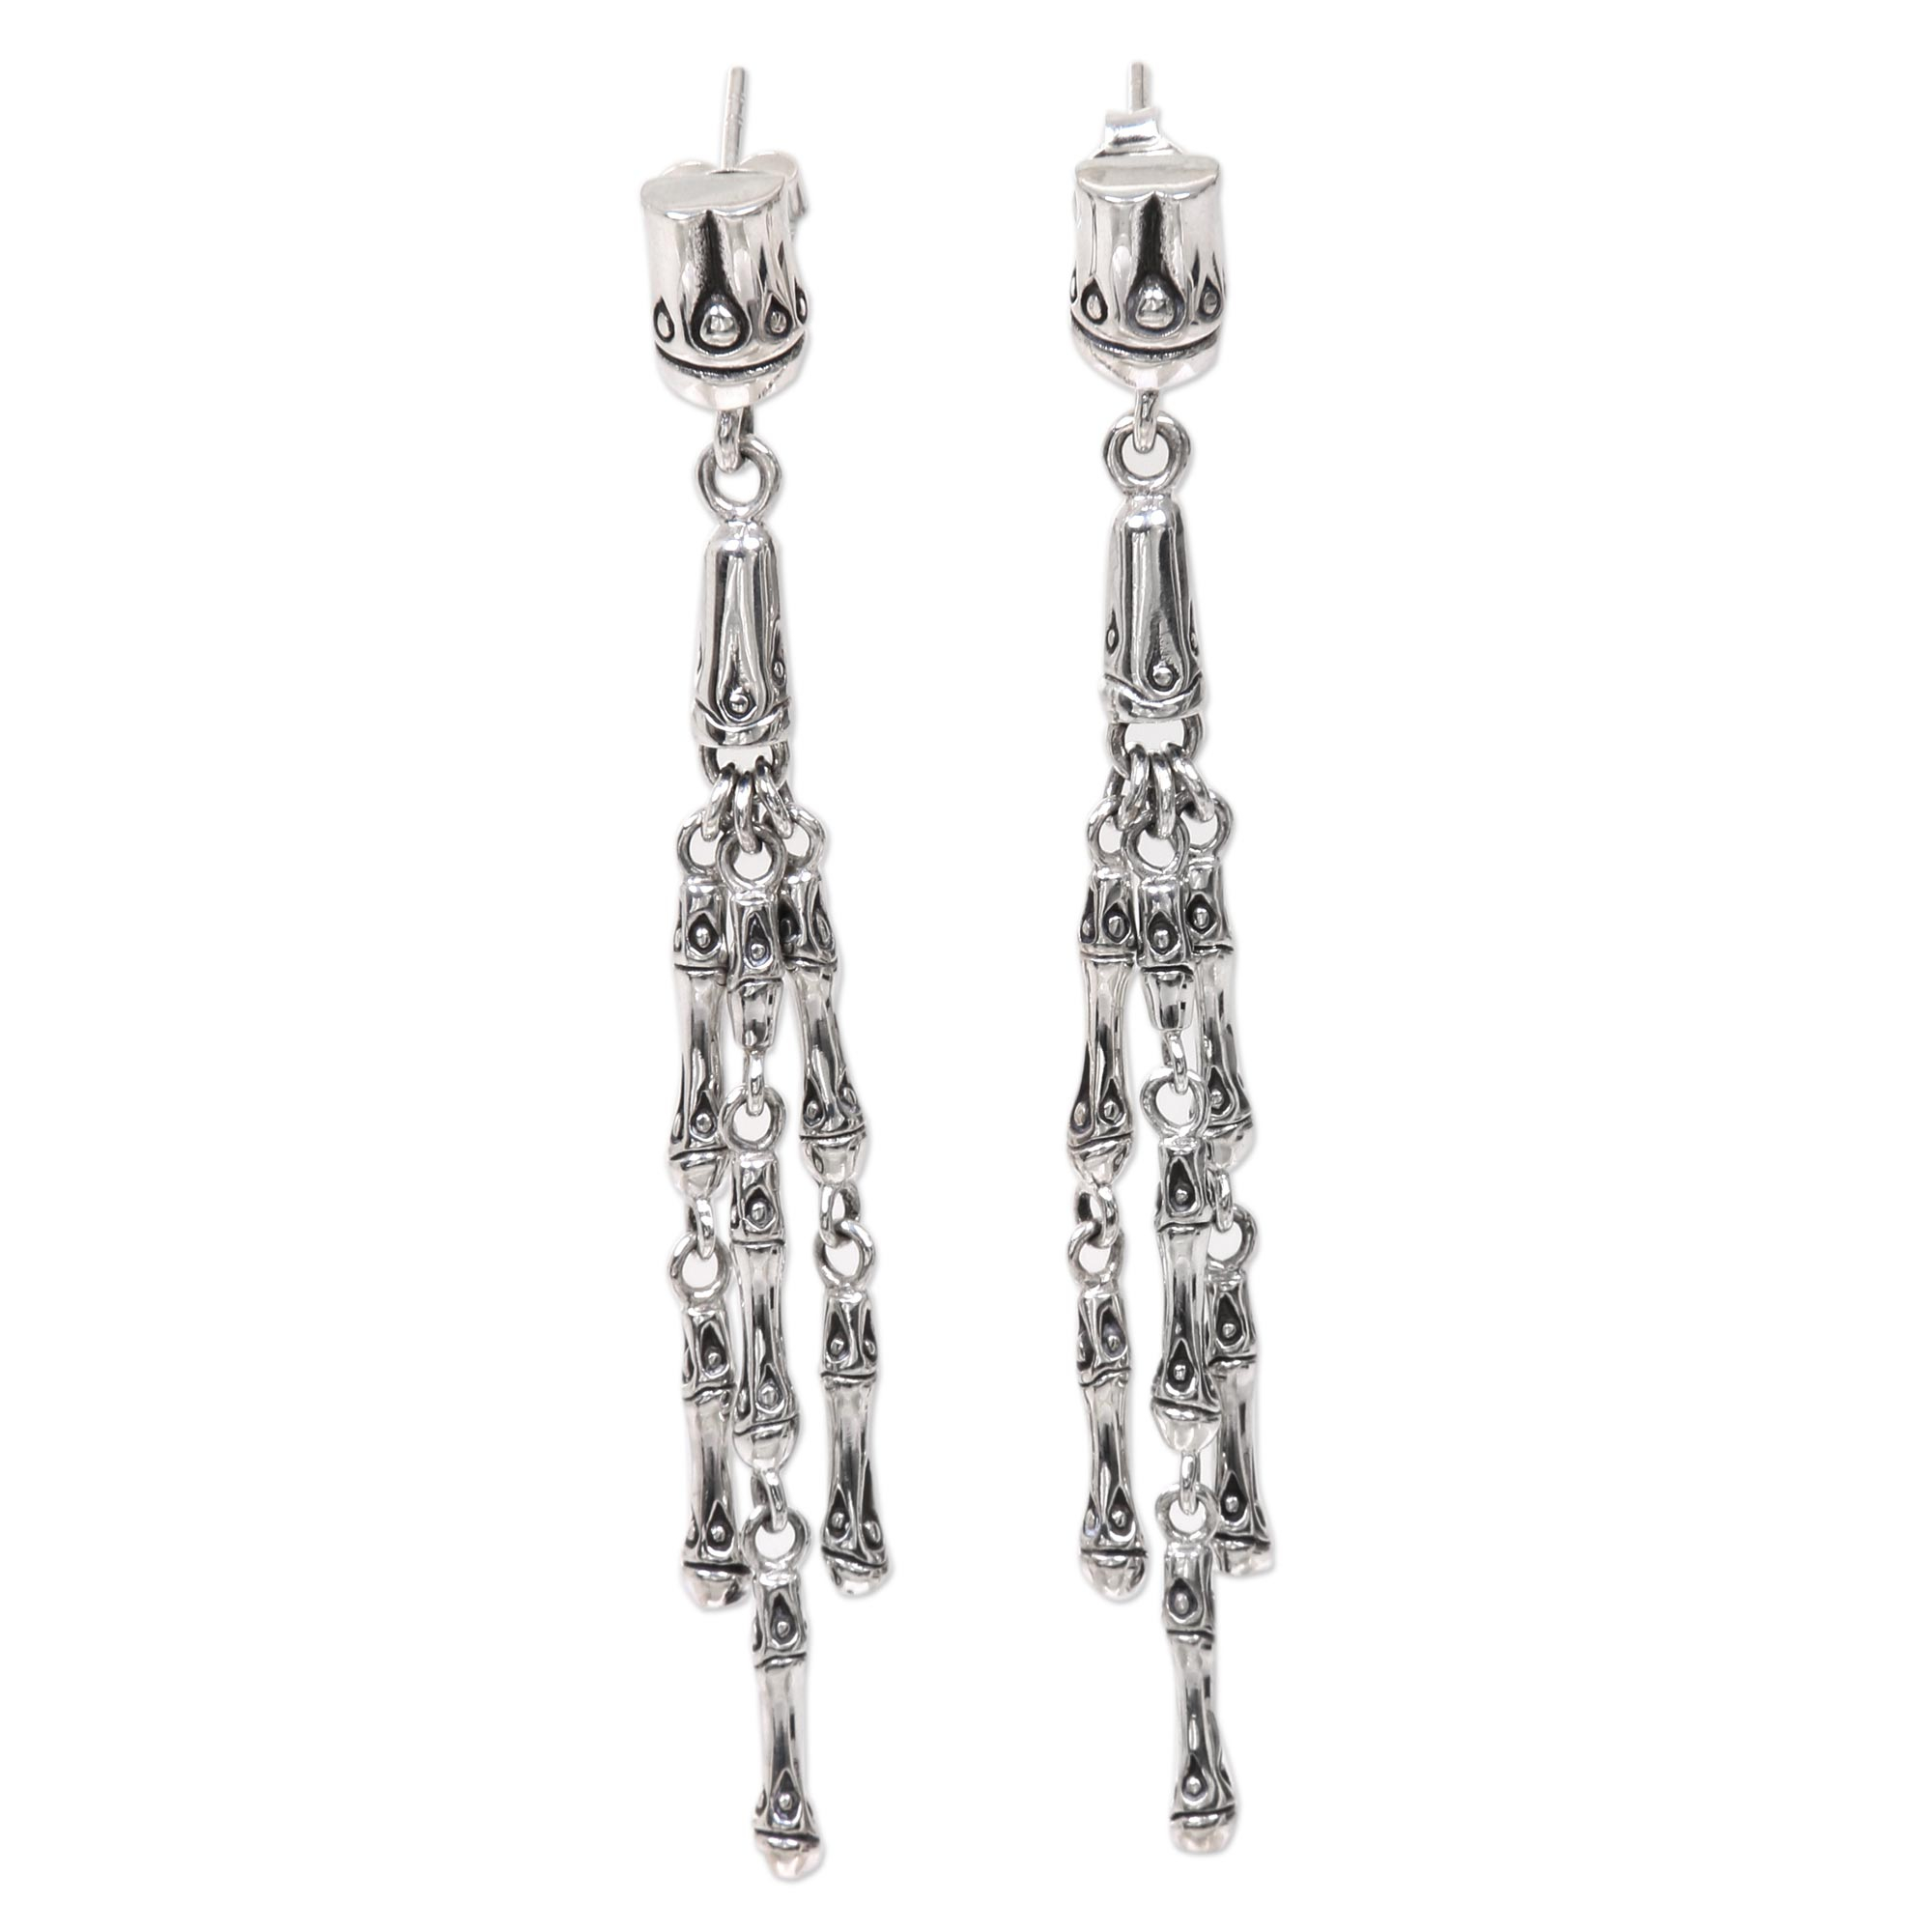 Sterling Silver Dangle Earrings with Bamboo Motif - Bamboo Shoots | NOVICA